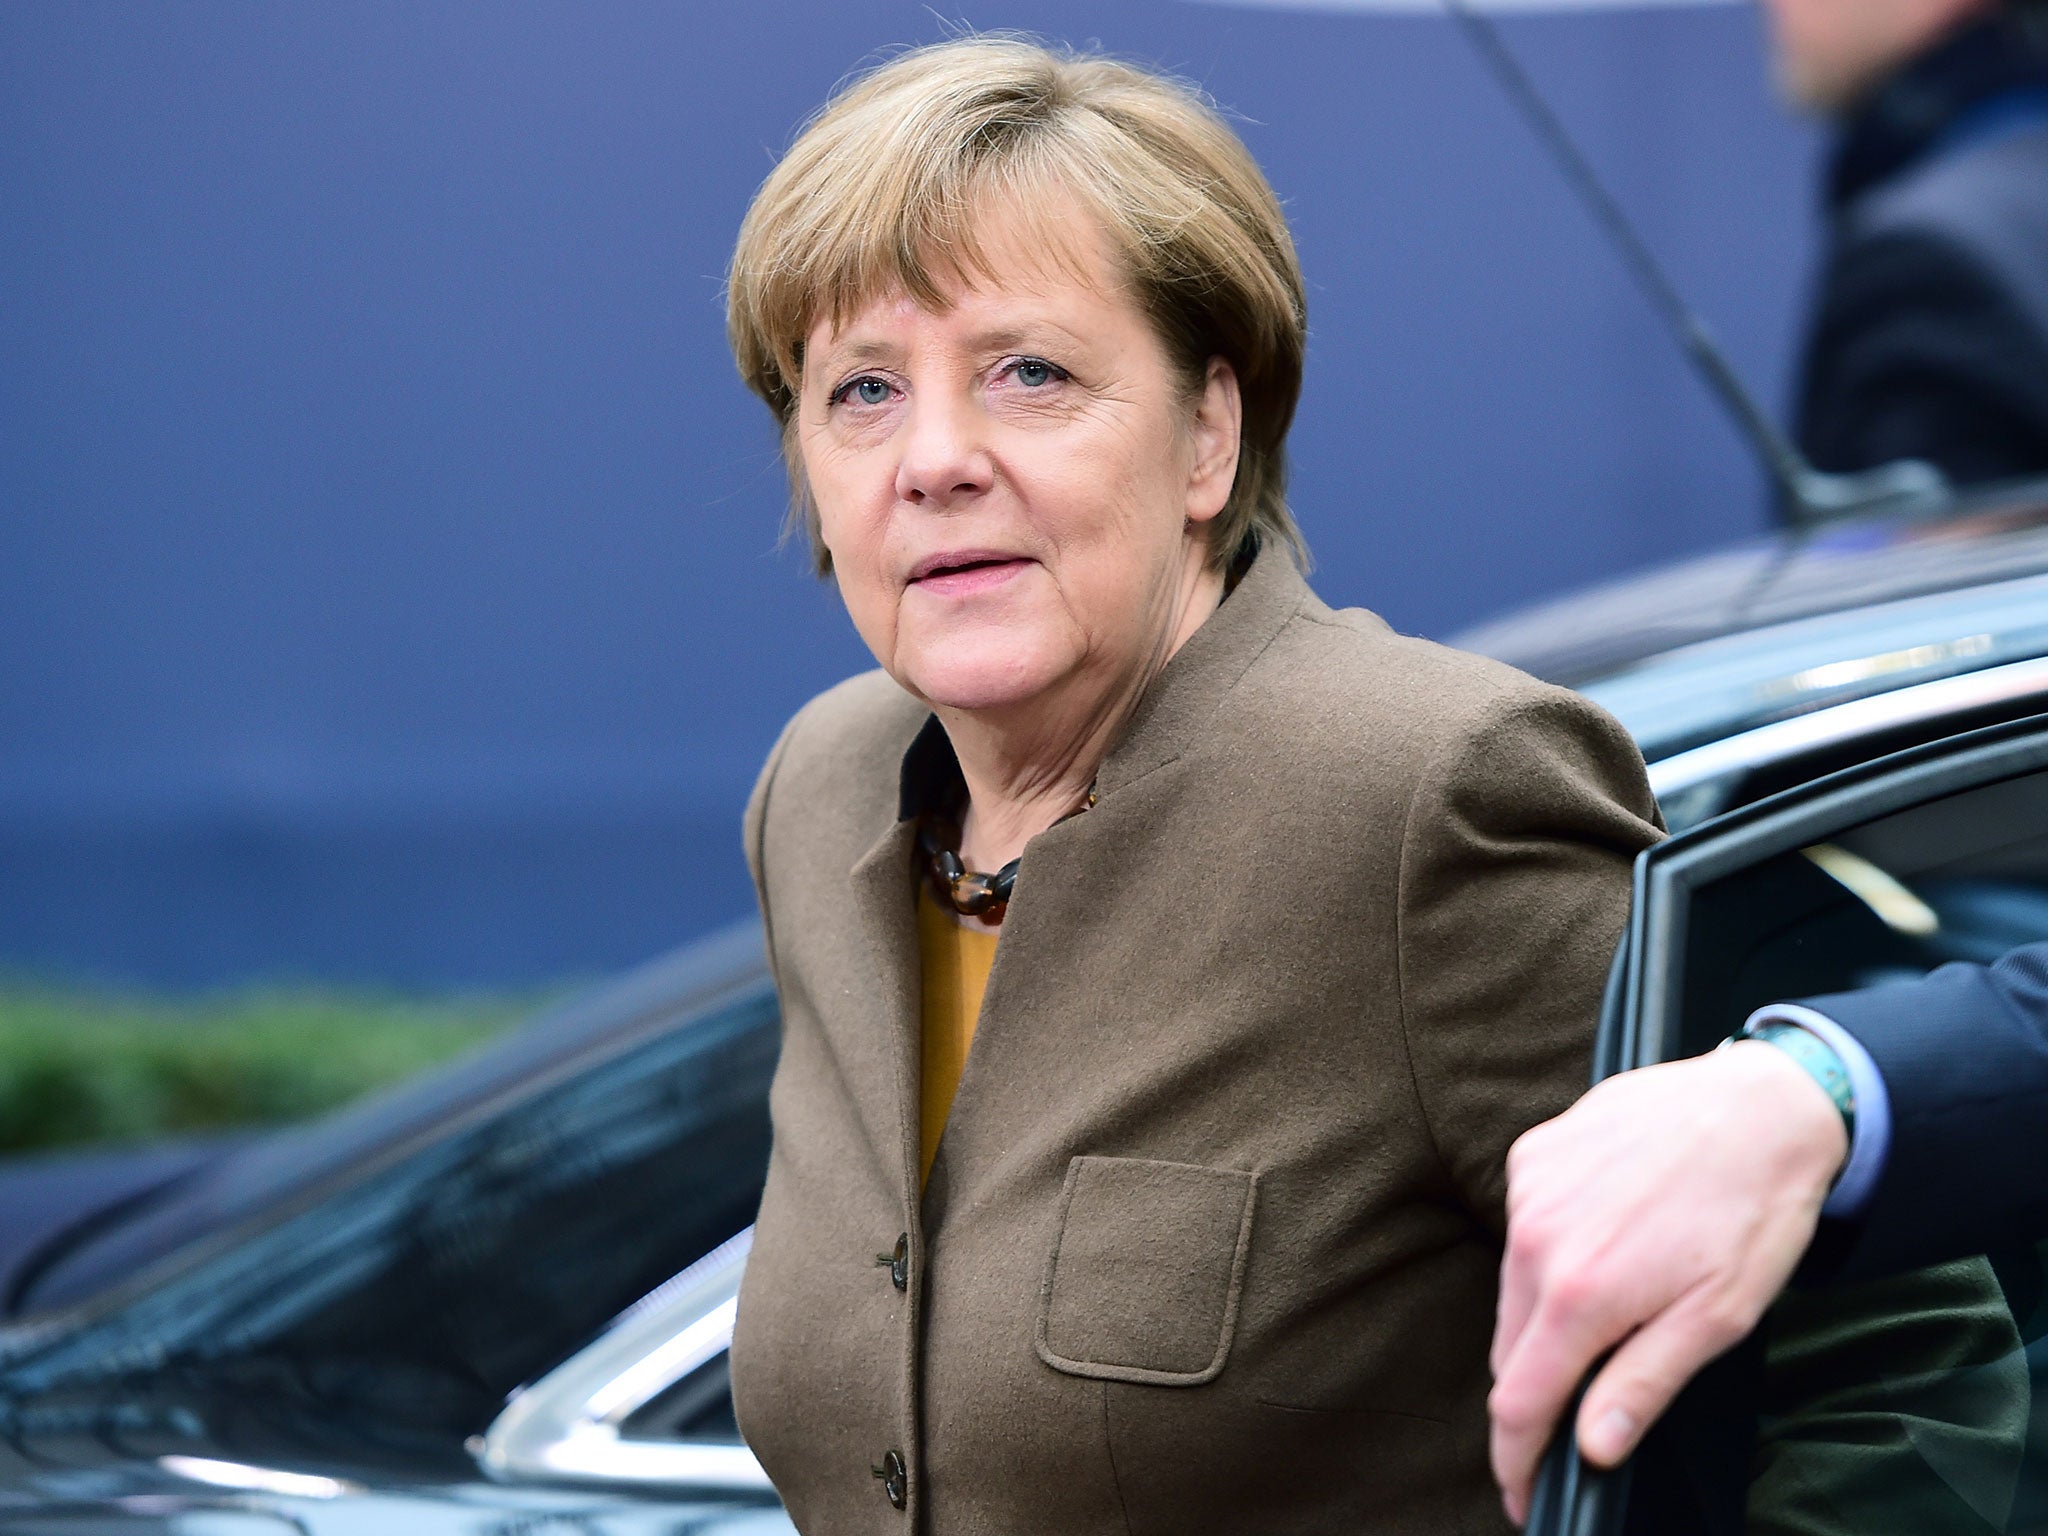 Angela Merkel is pushing for a deal with Turkey aimed at slowing the flow of refugees